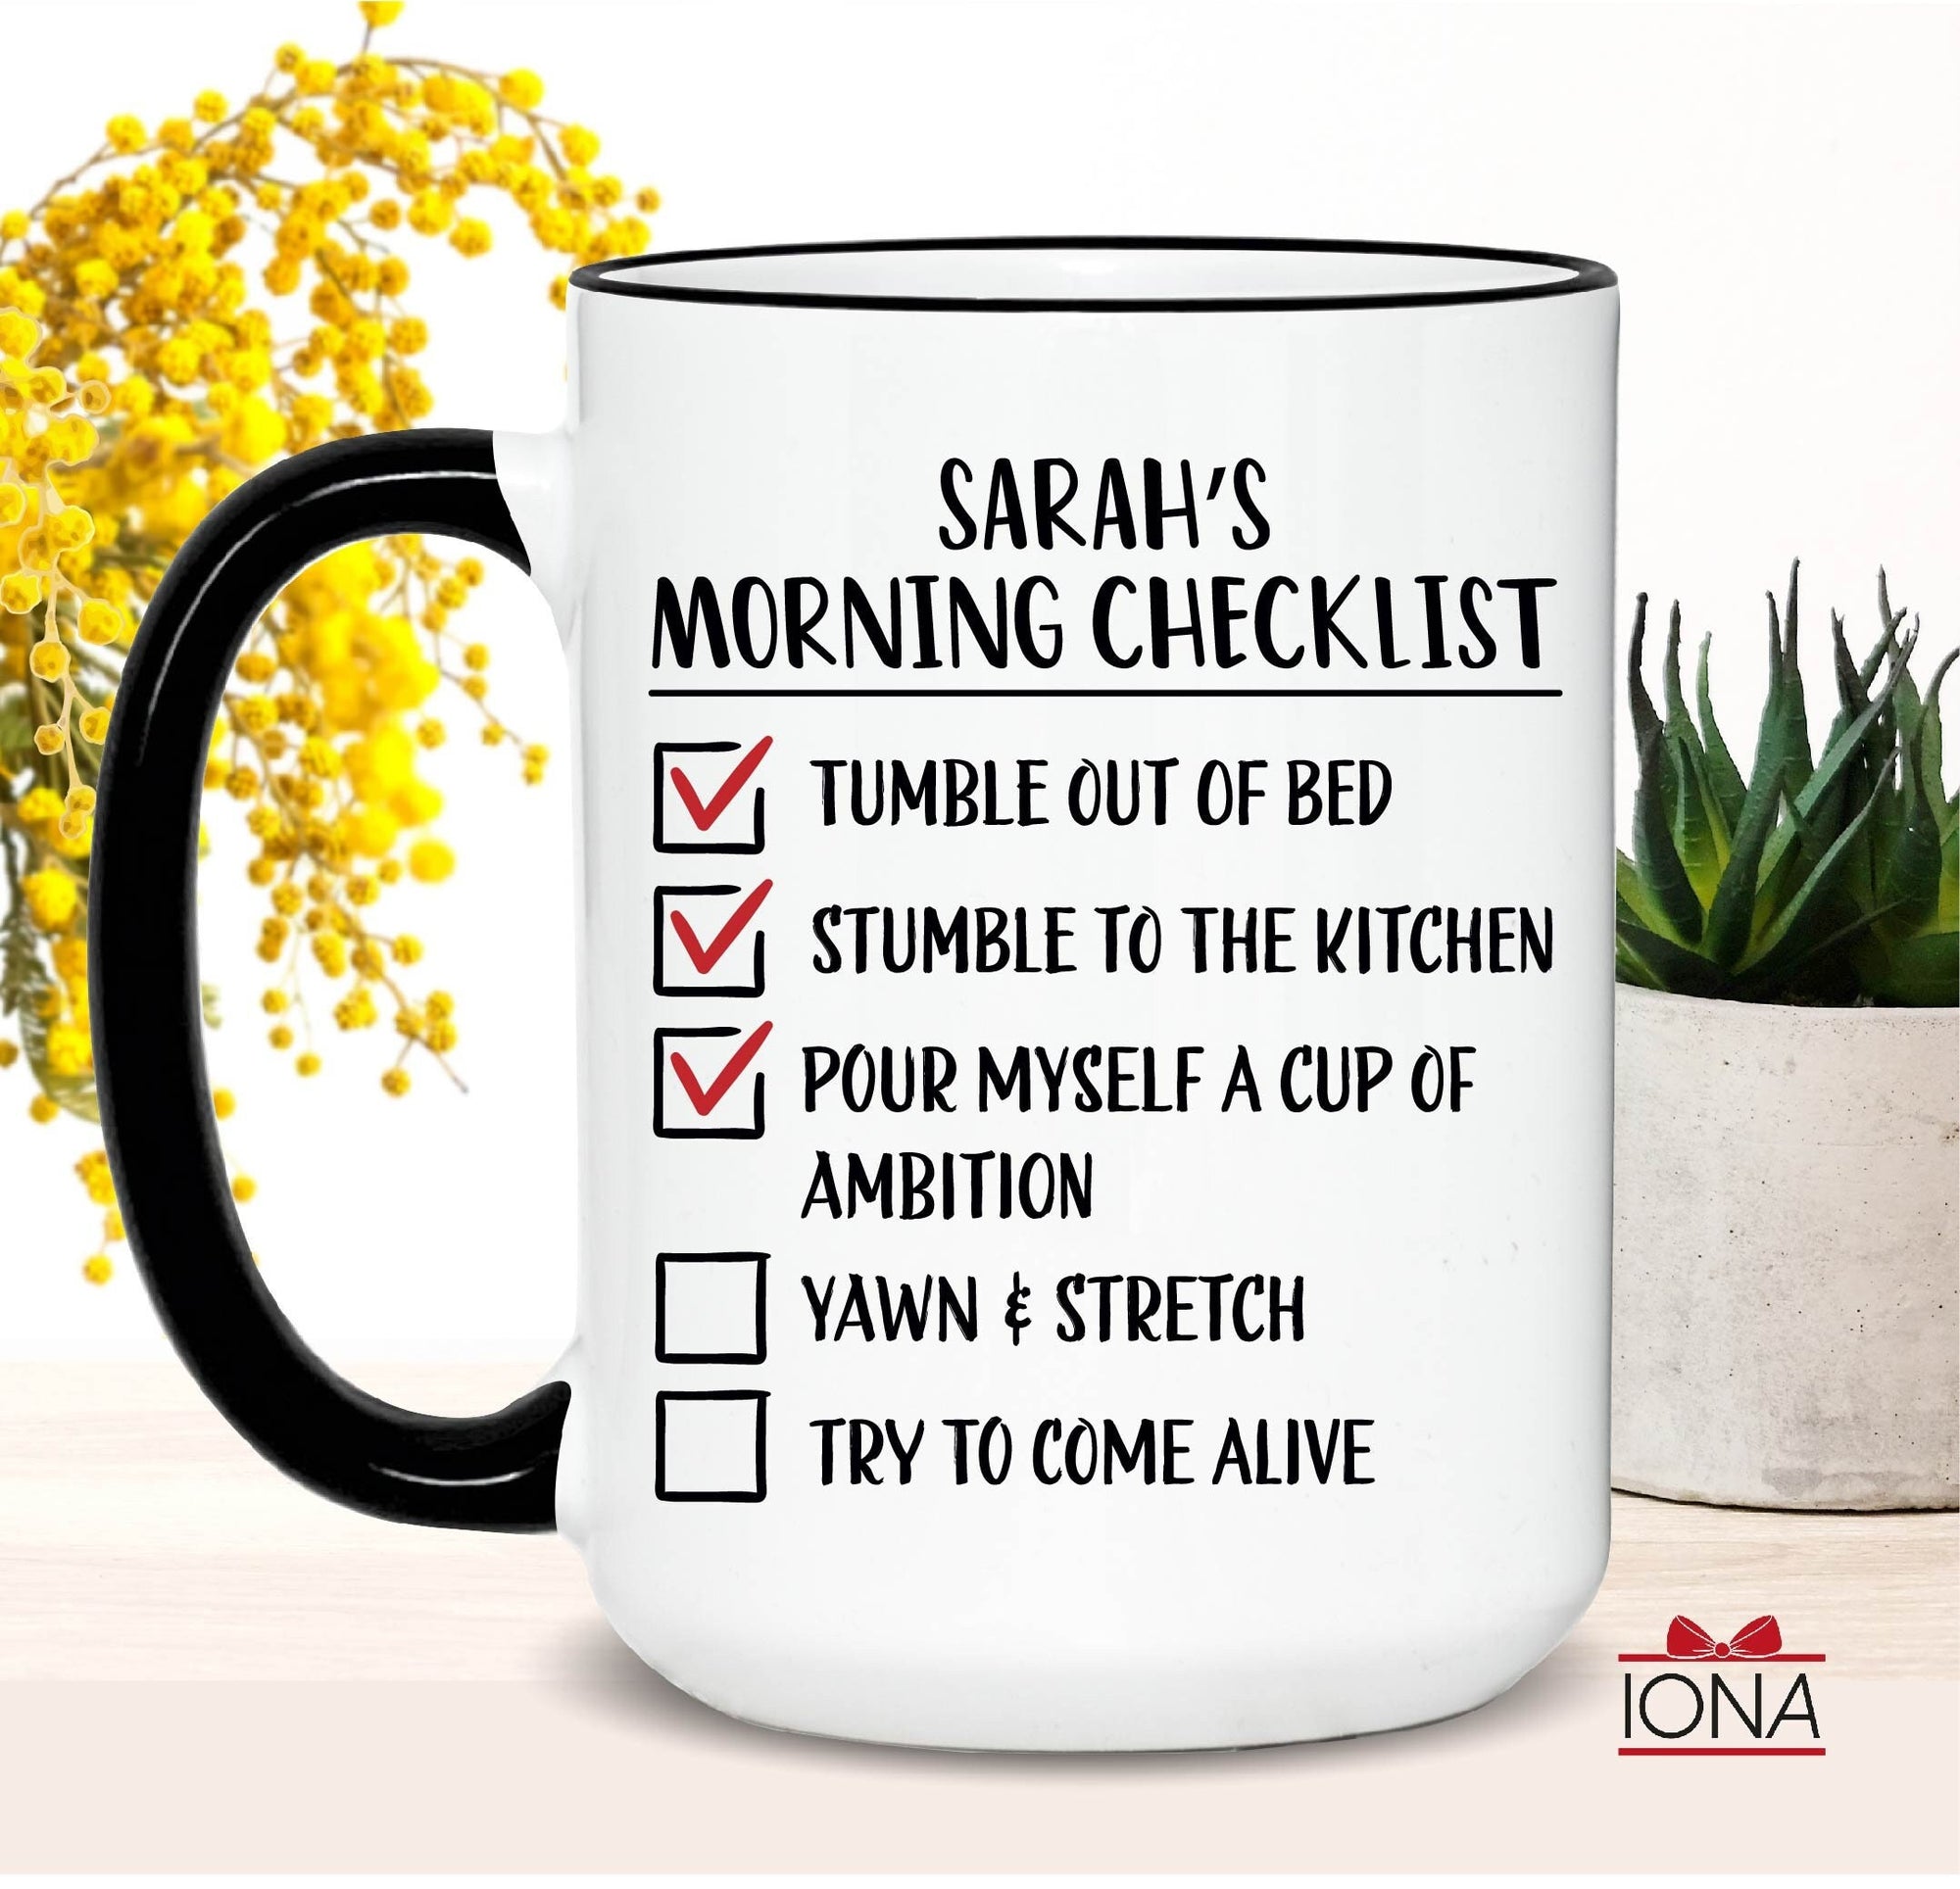 Personalized Morning Checklist Cup of Ambition Coffee Mug, Gift for women, Funny tea cup for women, Gift for men, Birthday gift for women